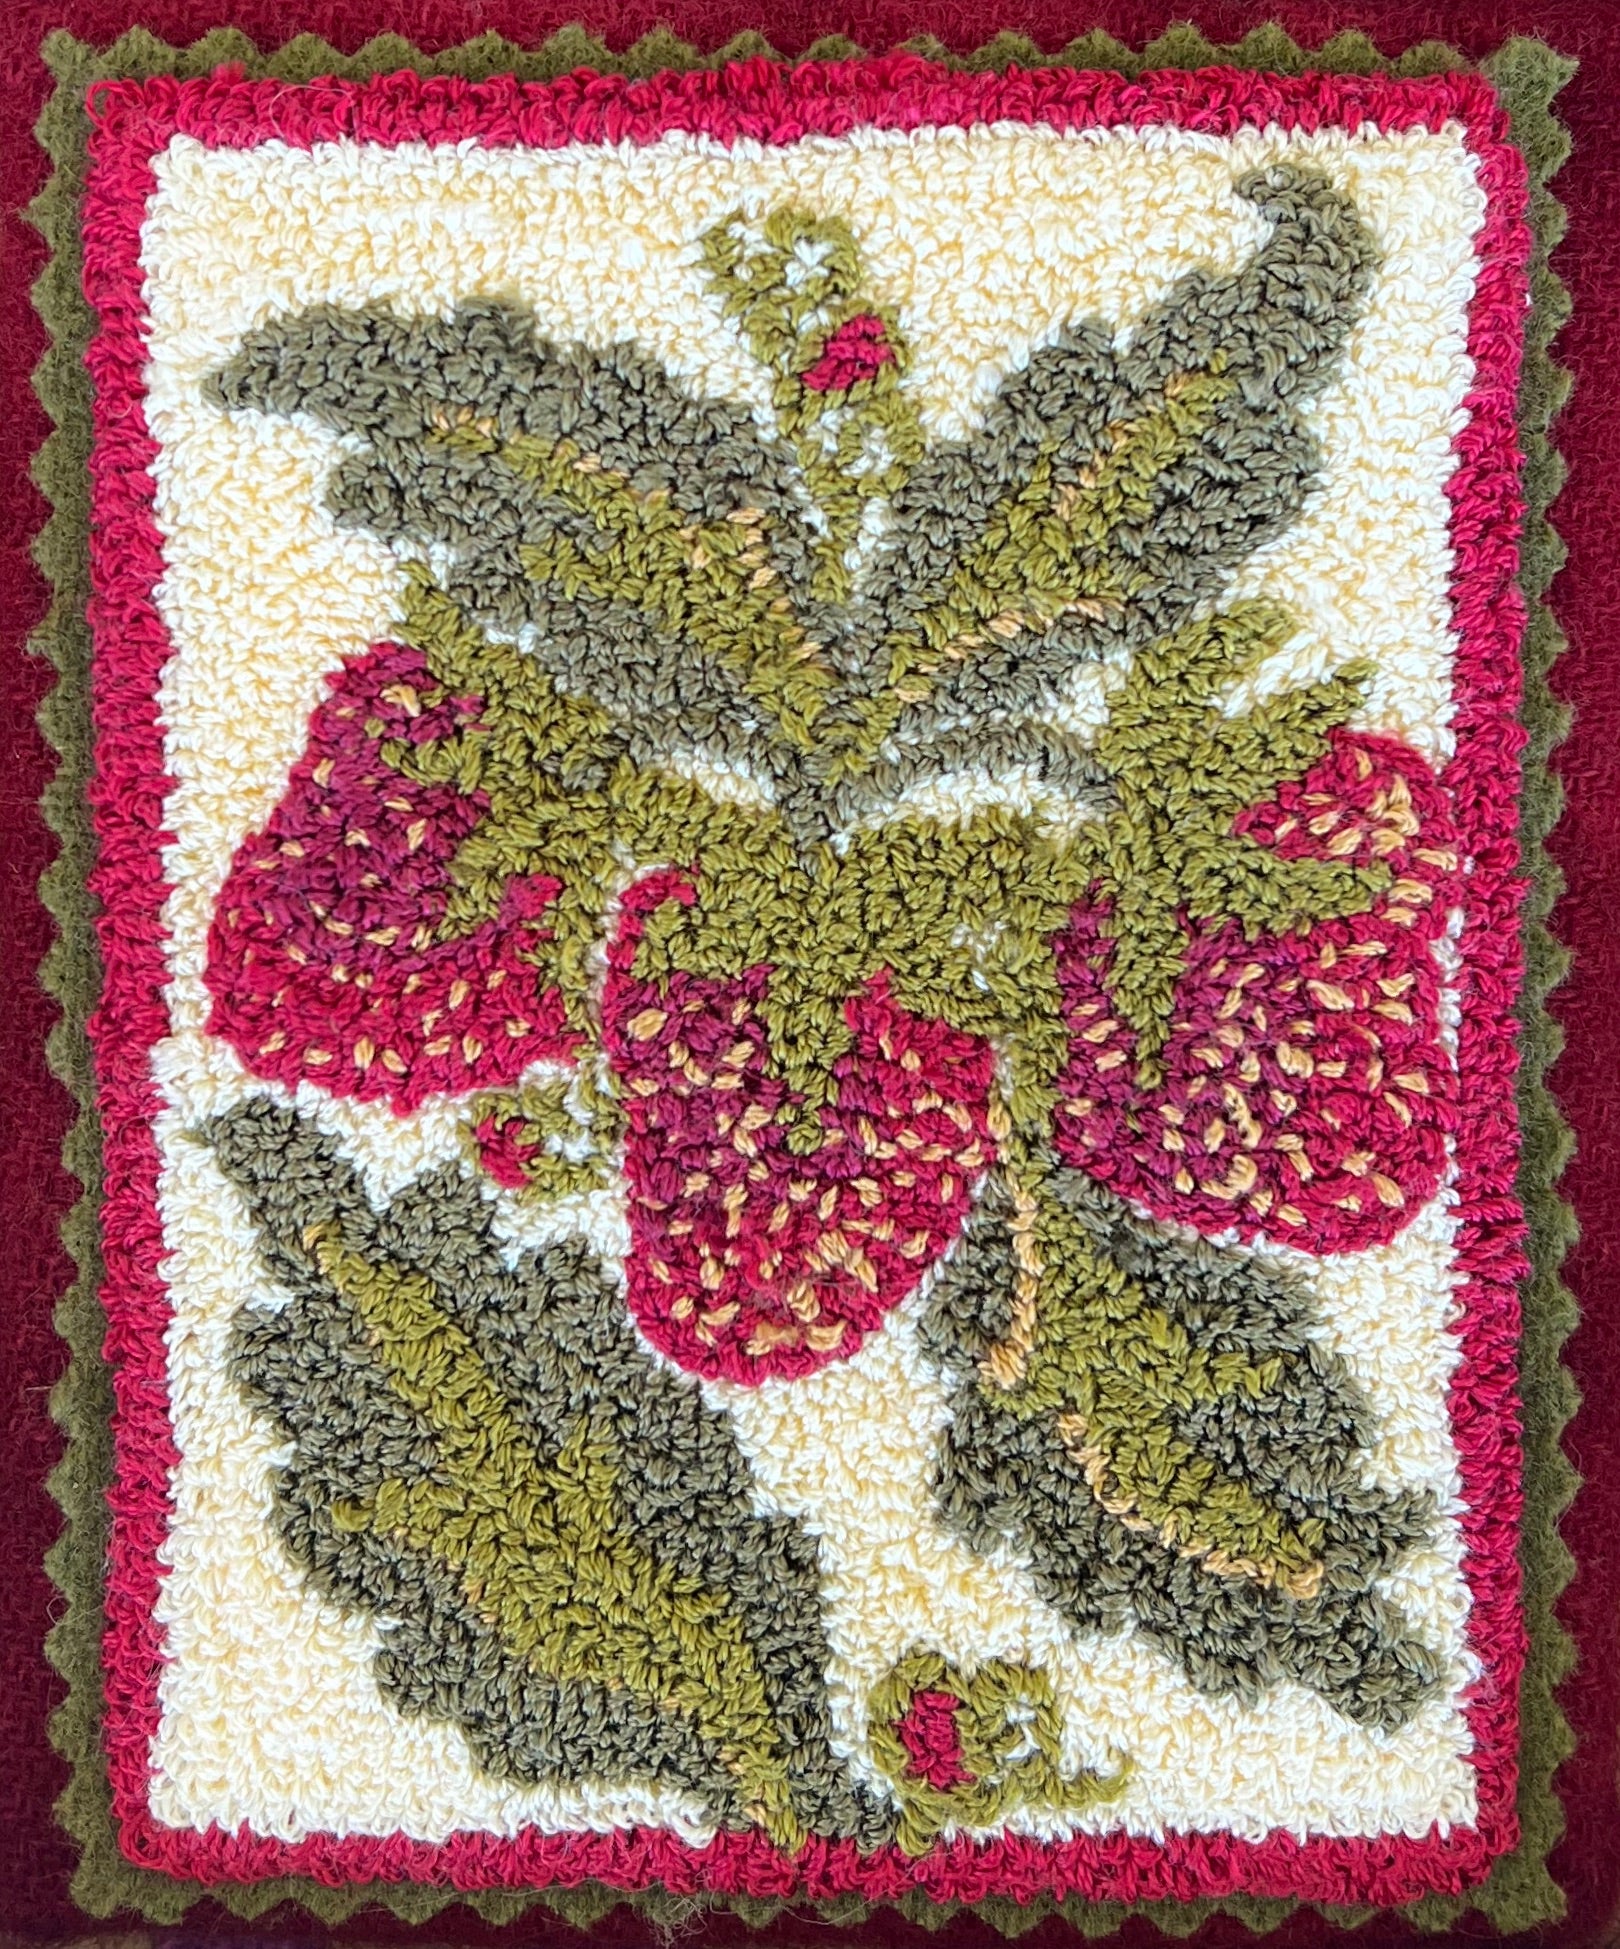 Strawberry Trio- PDF Digital Download Punch Needle Pattern by Orphaned Wool. This wonderful 4 page digital download file includes directions for finishing along with beginner's tips and directions for creating this lovey punch needle design. Copyright 2023 Kelly Kanyok/ Orphaned Wool.